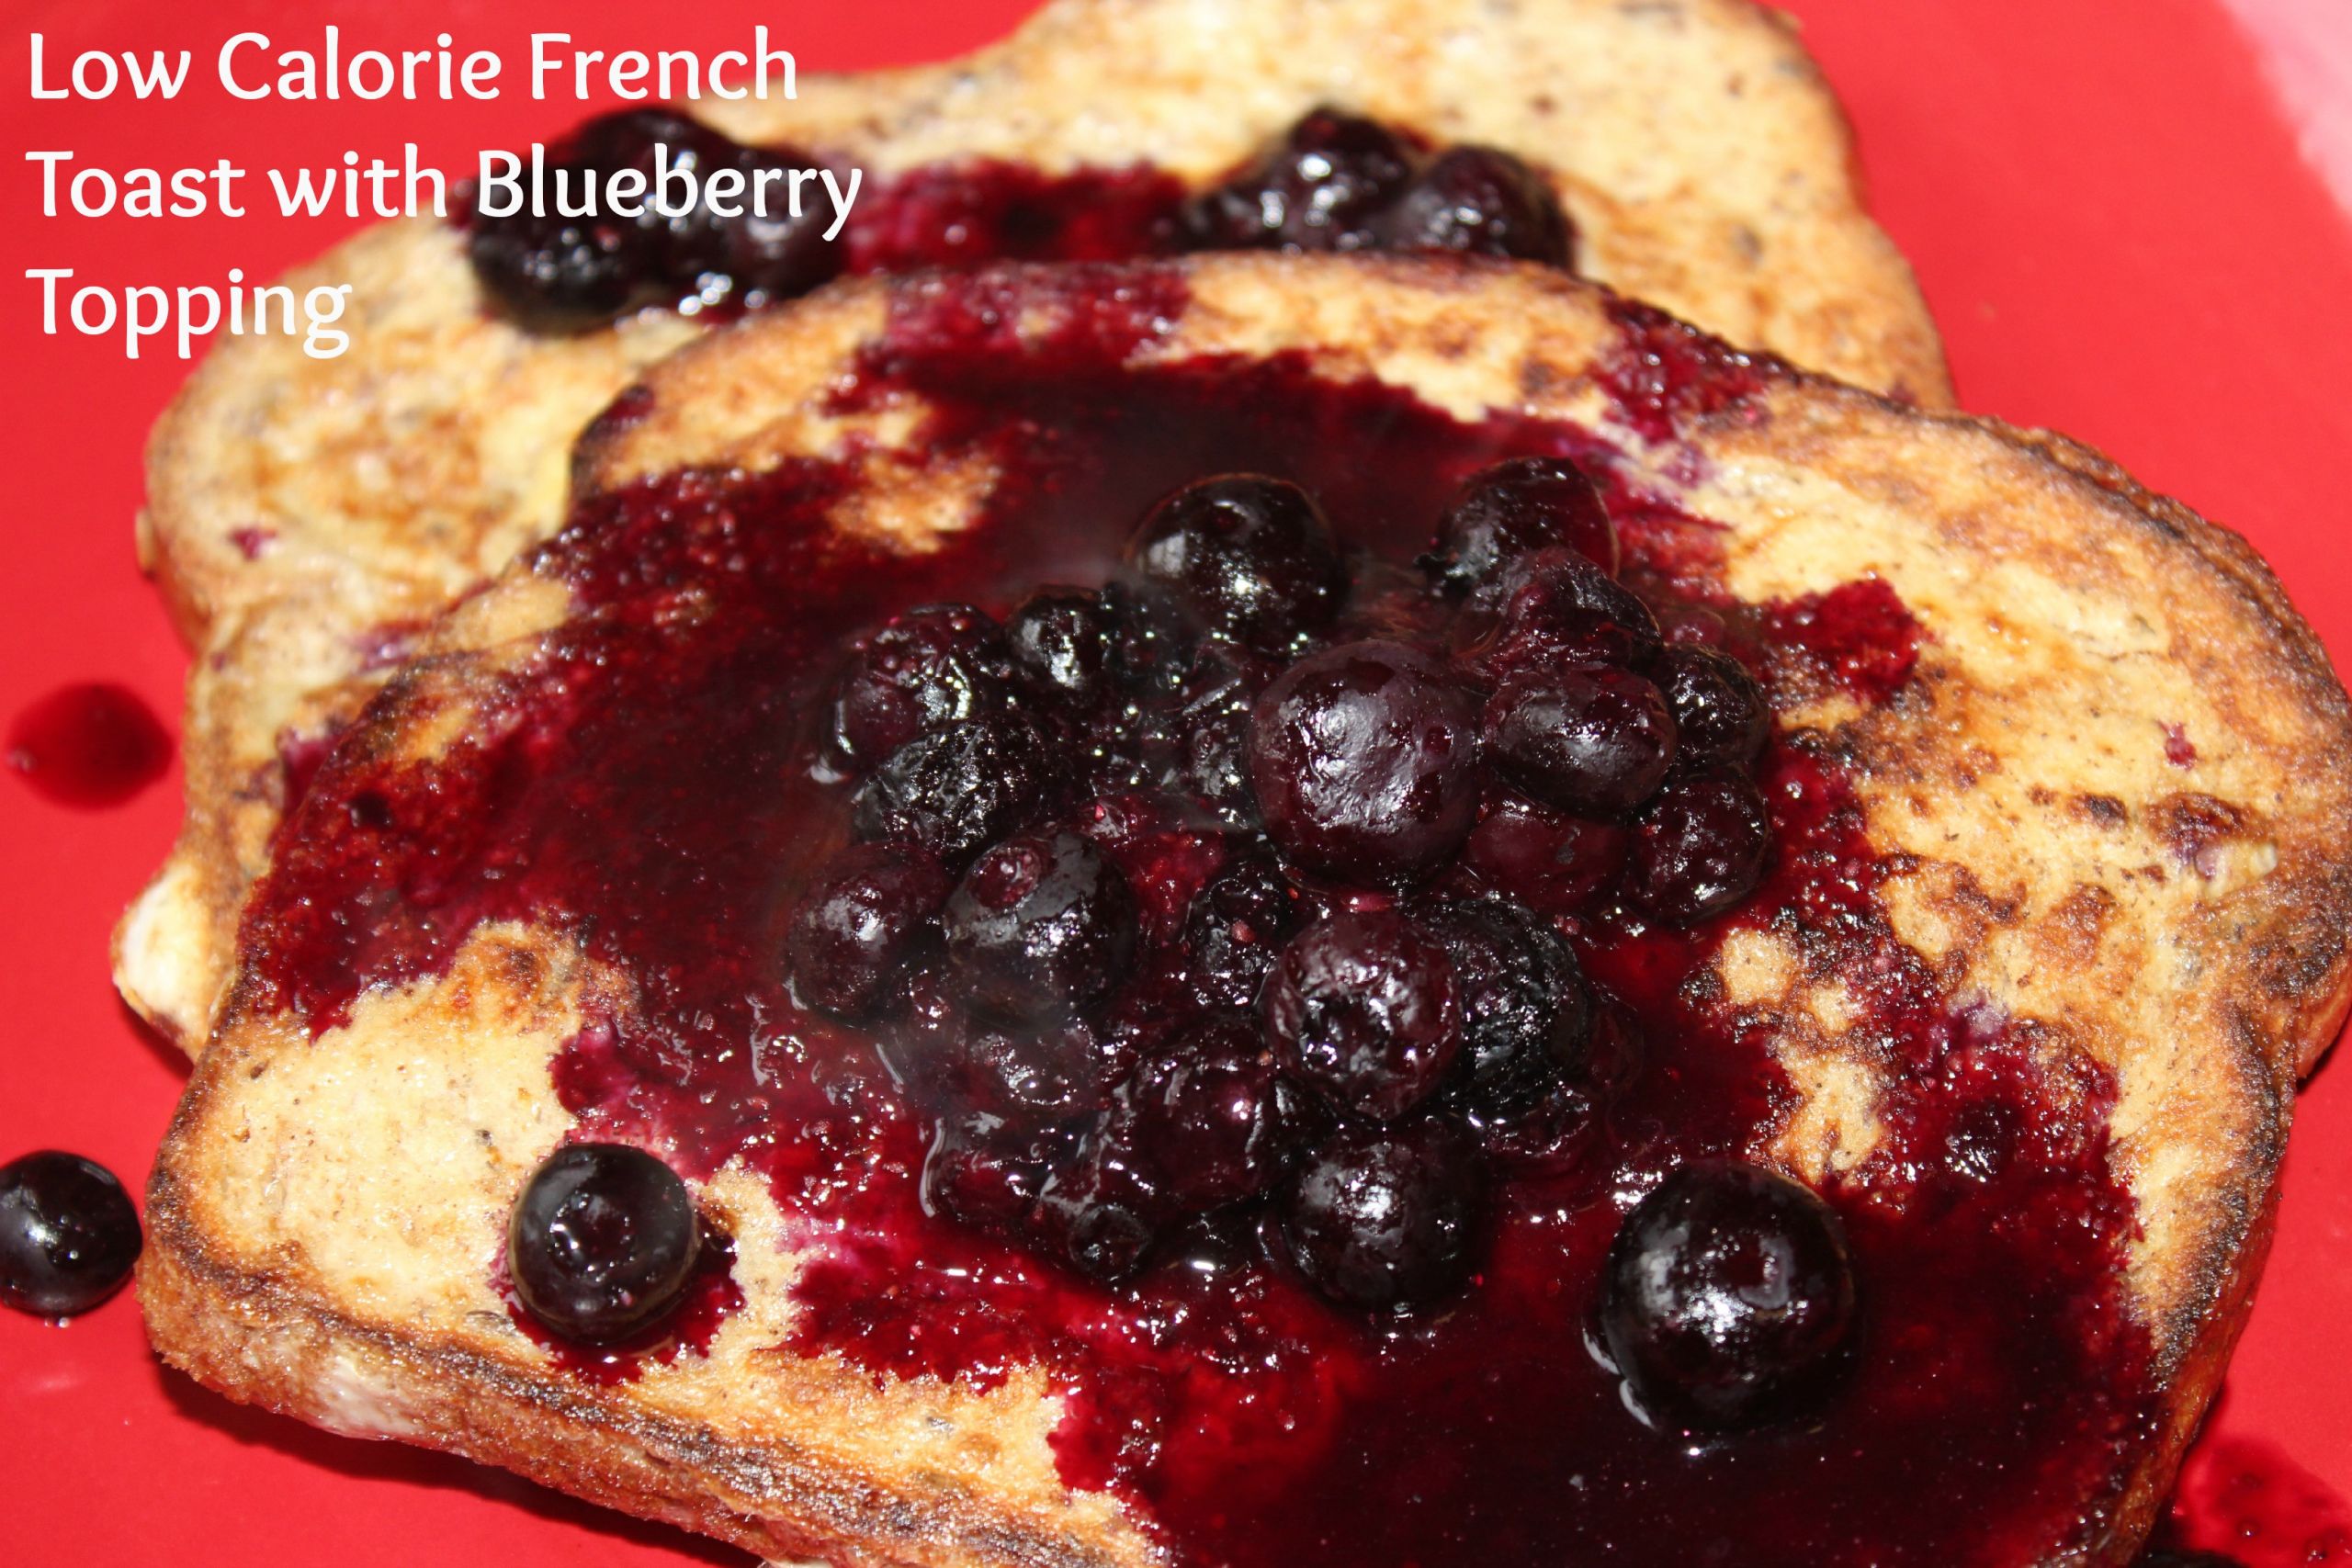 Low Calorie French Toast
 Healthy Low Calorie French Toast with Blueberry Topping